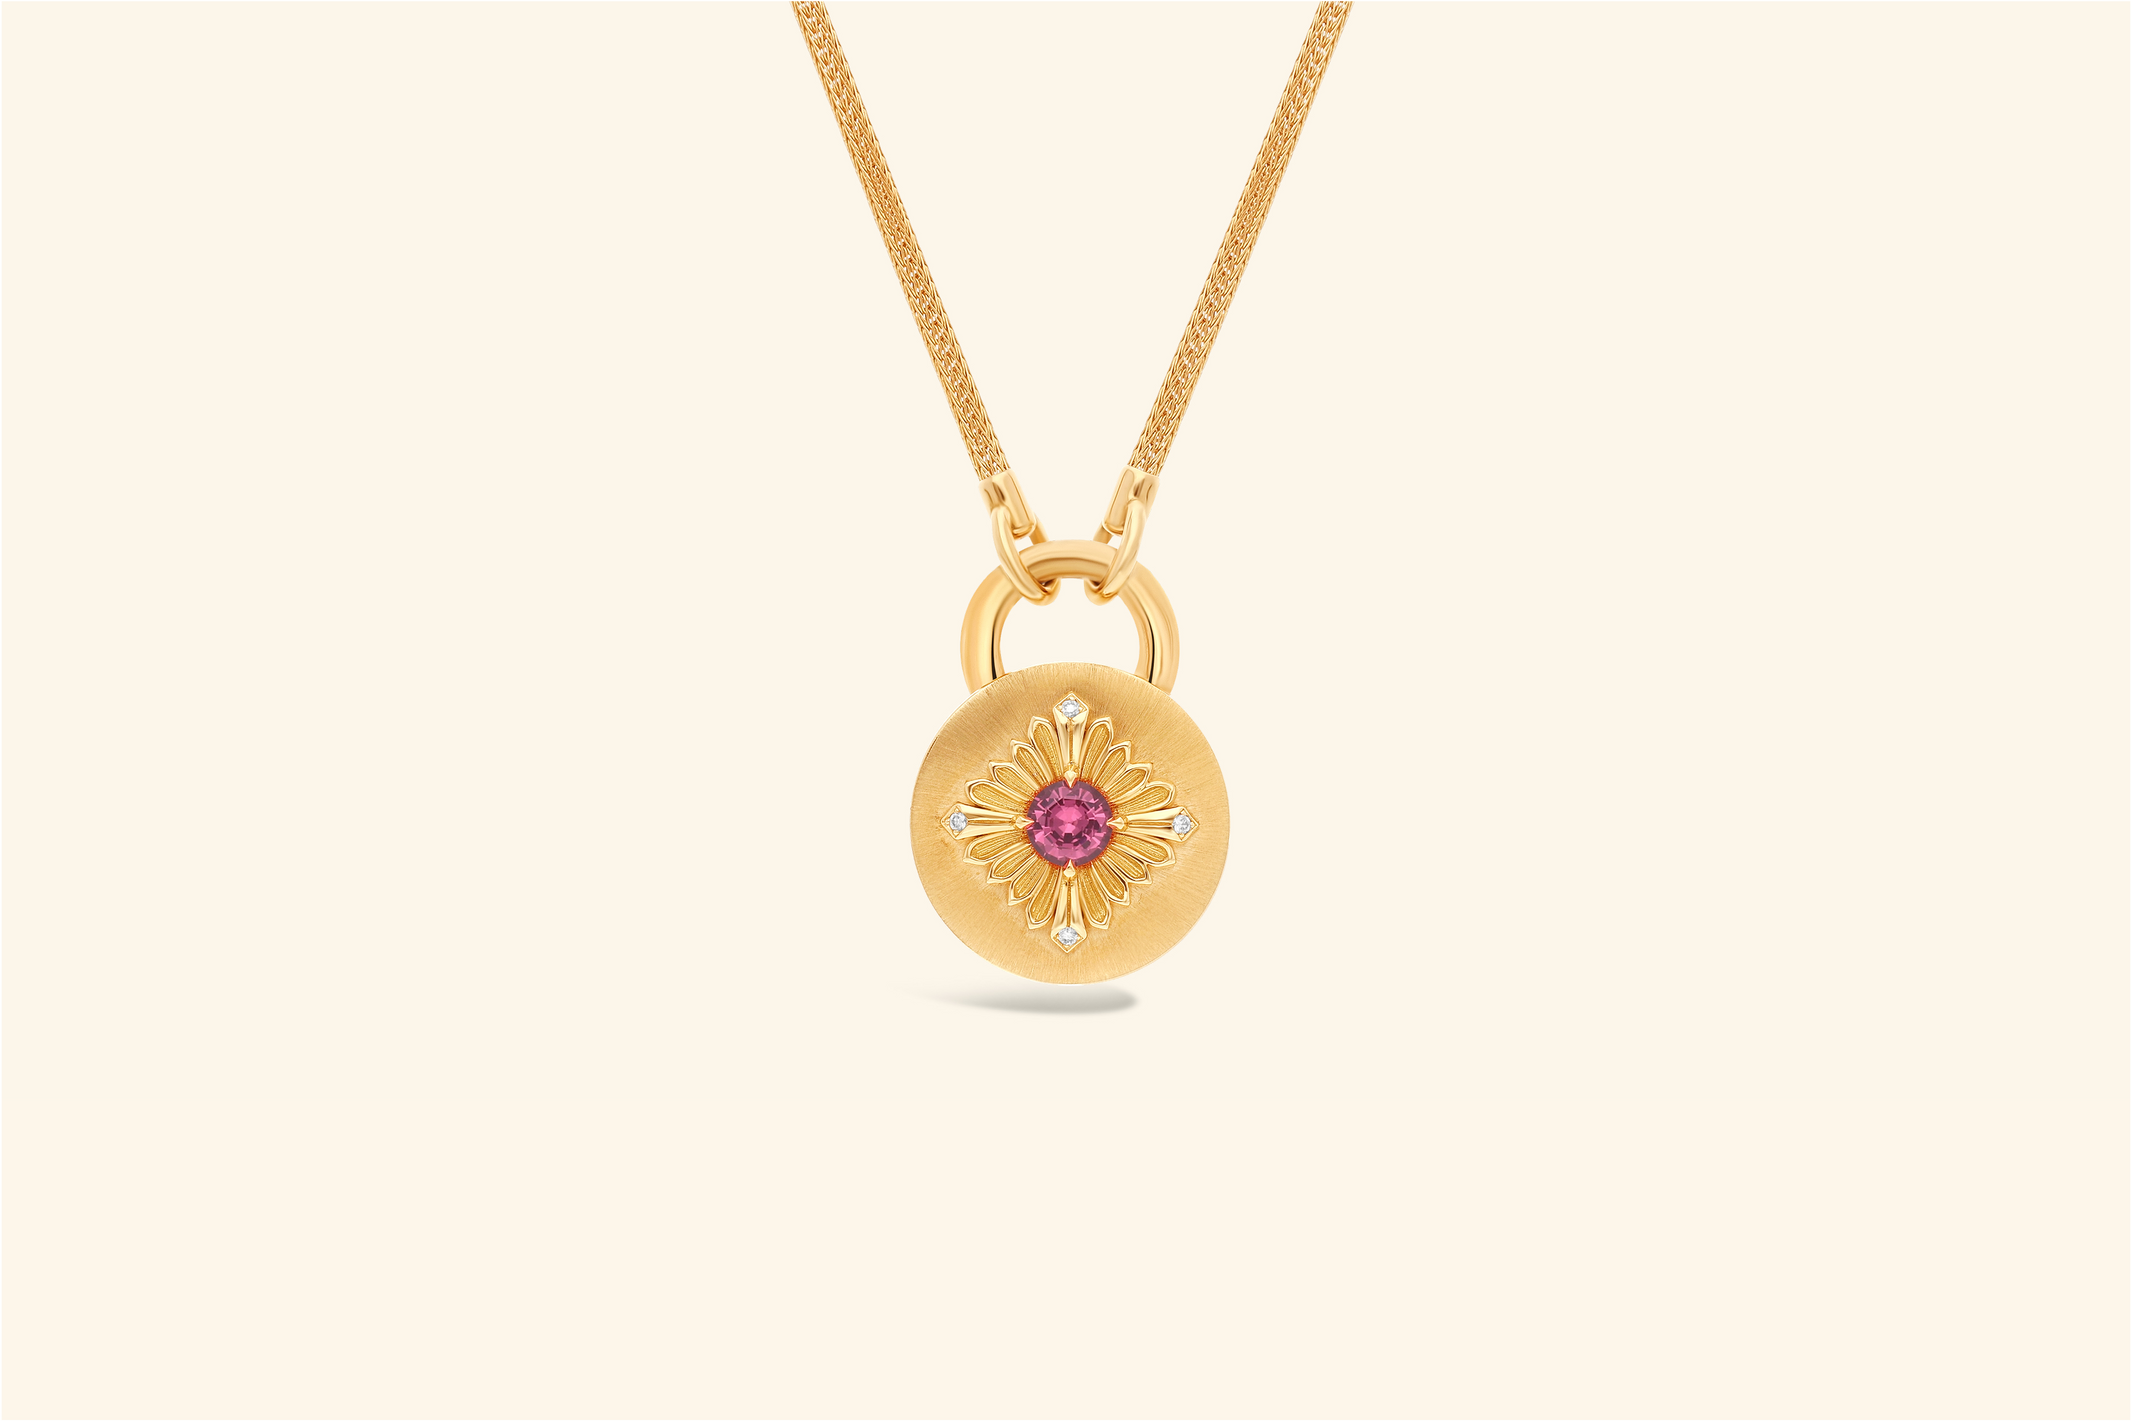 Tag necklace, yellow gold, diamonds, spinel